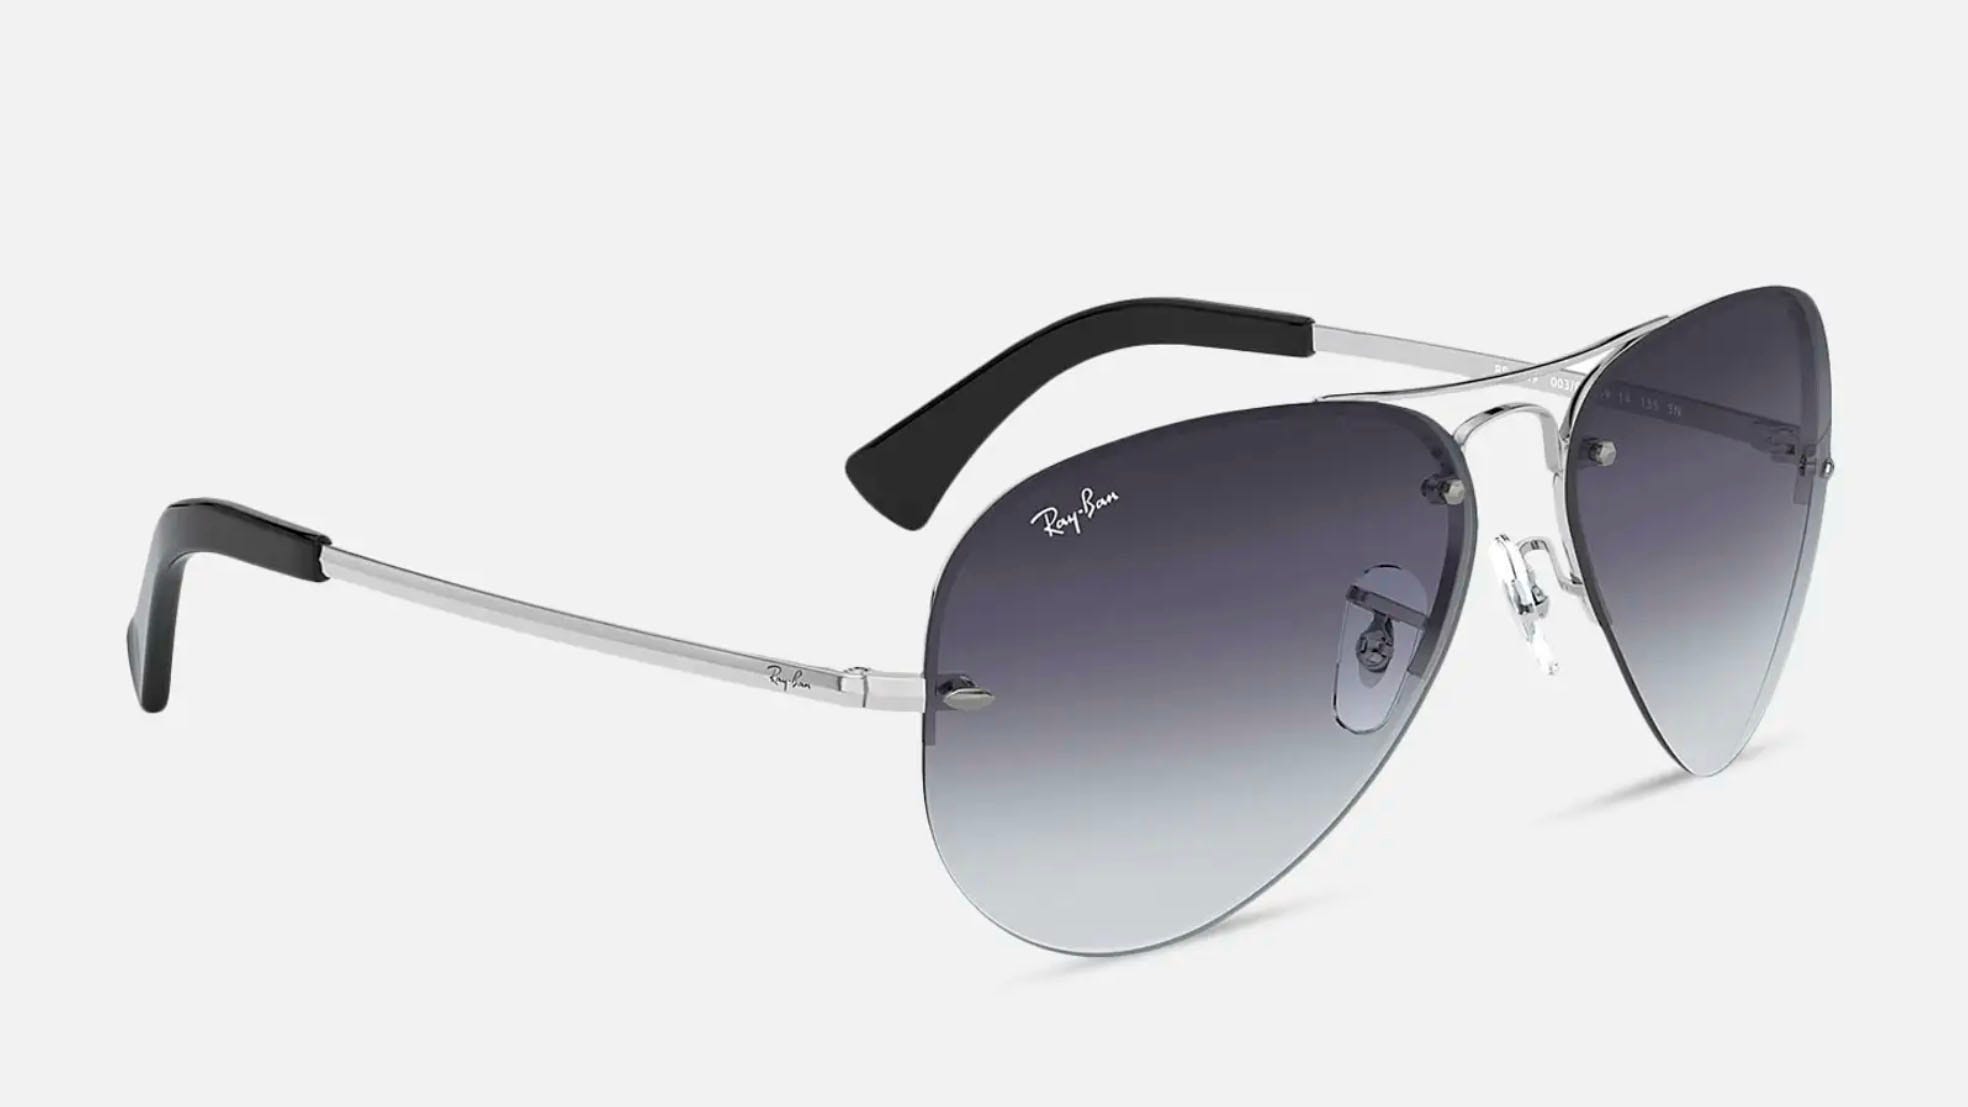 Ray-Ban sale: Get these iconic Aviators 